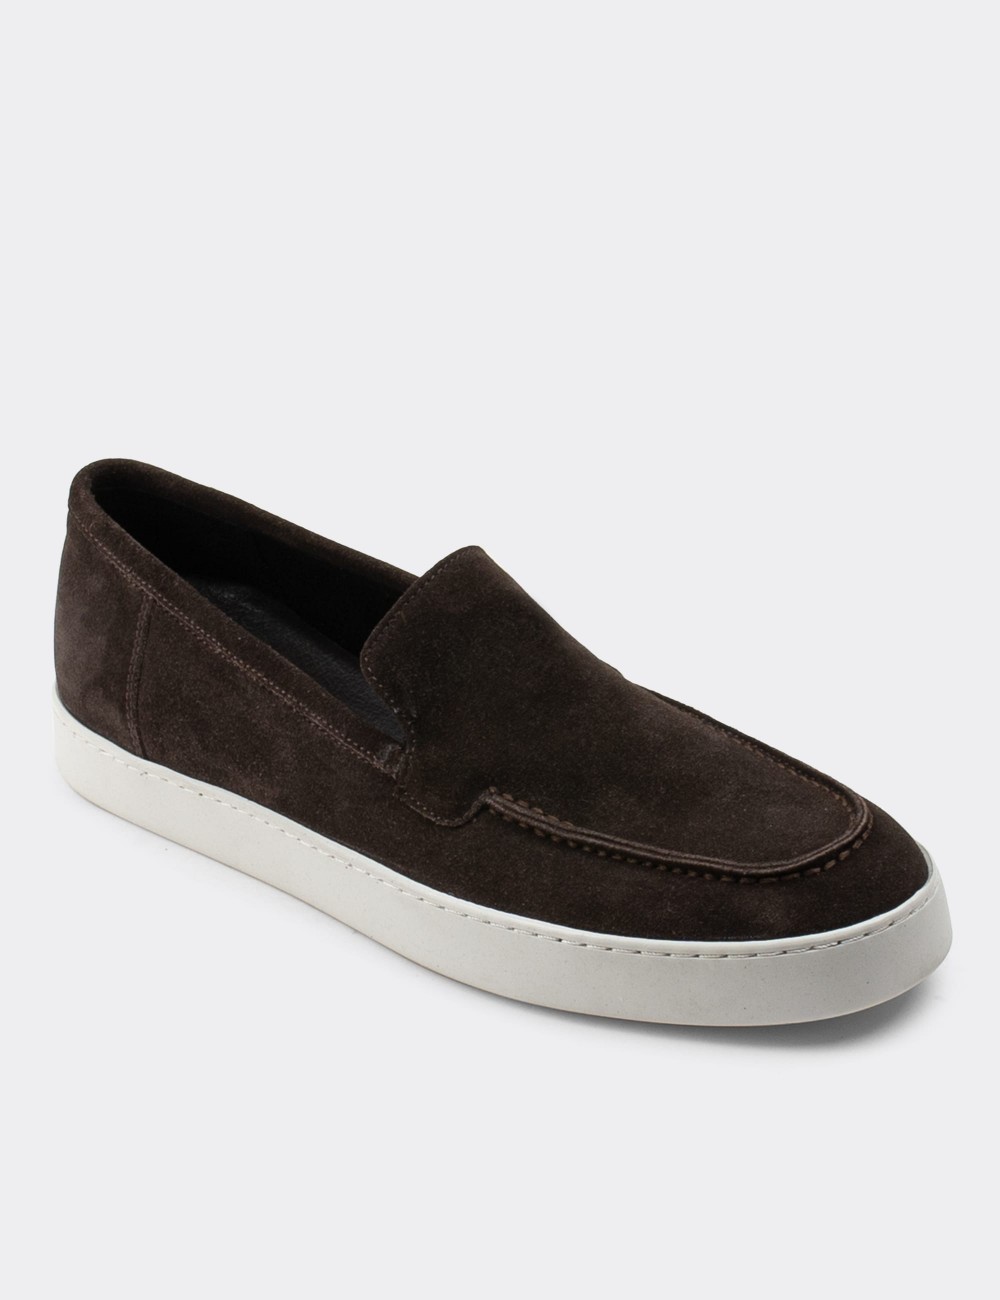 Brown Suede Leather Loafers - 01865MKHVC01